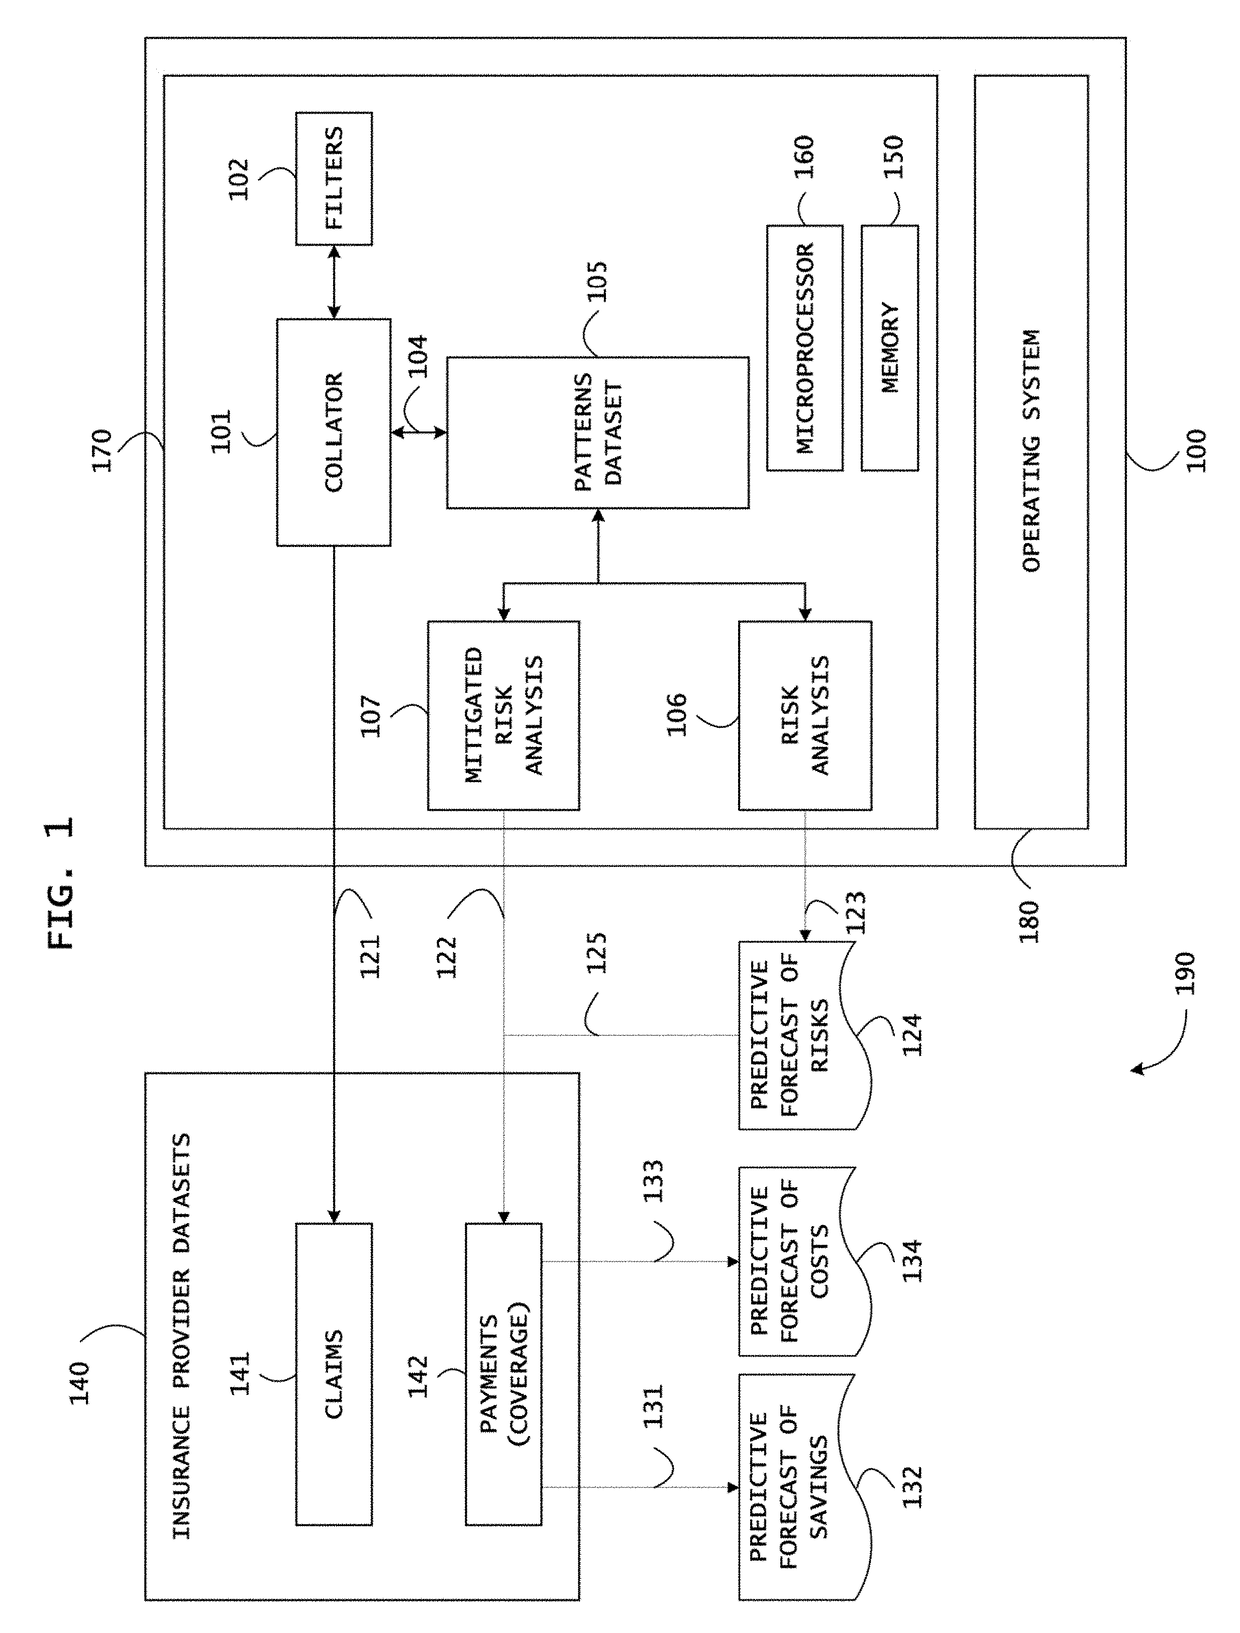 System and method for evidence based differential analysis and incentives based healthcare policy